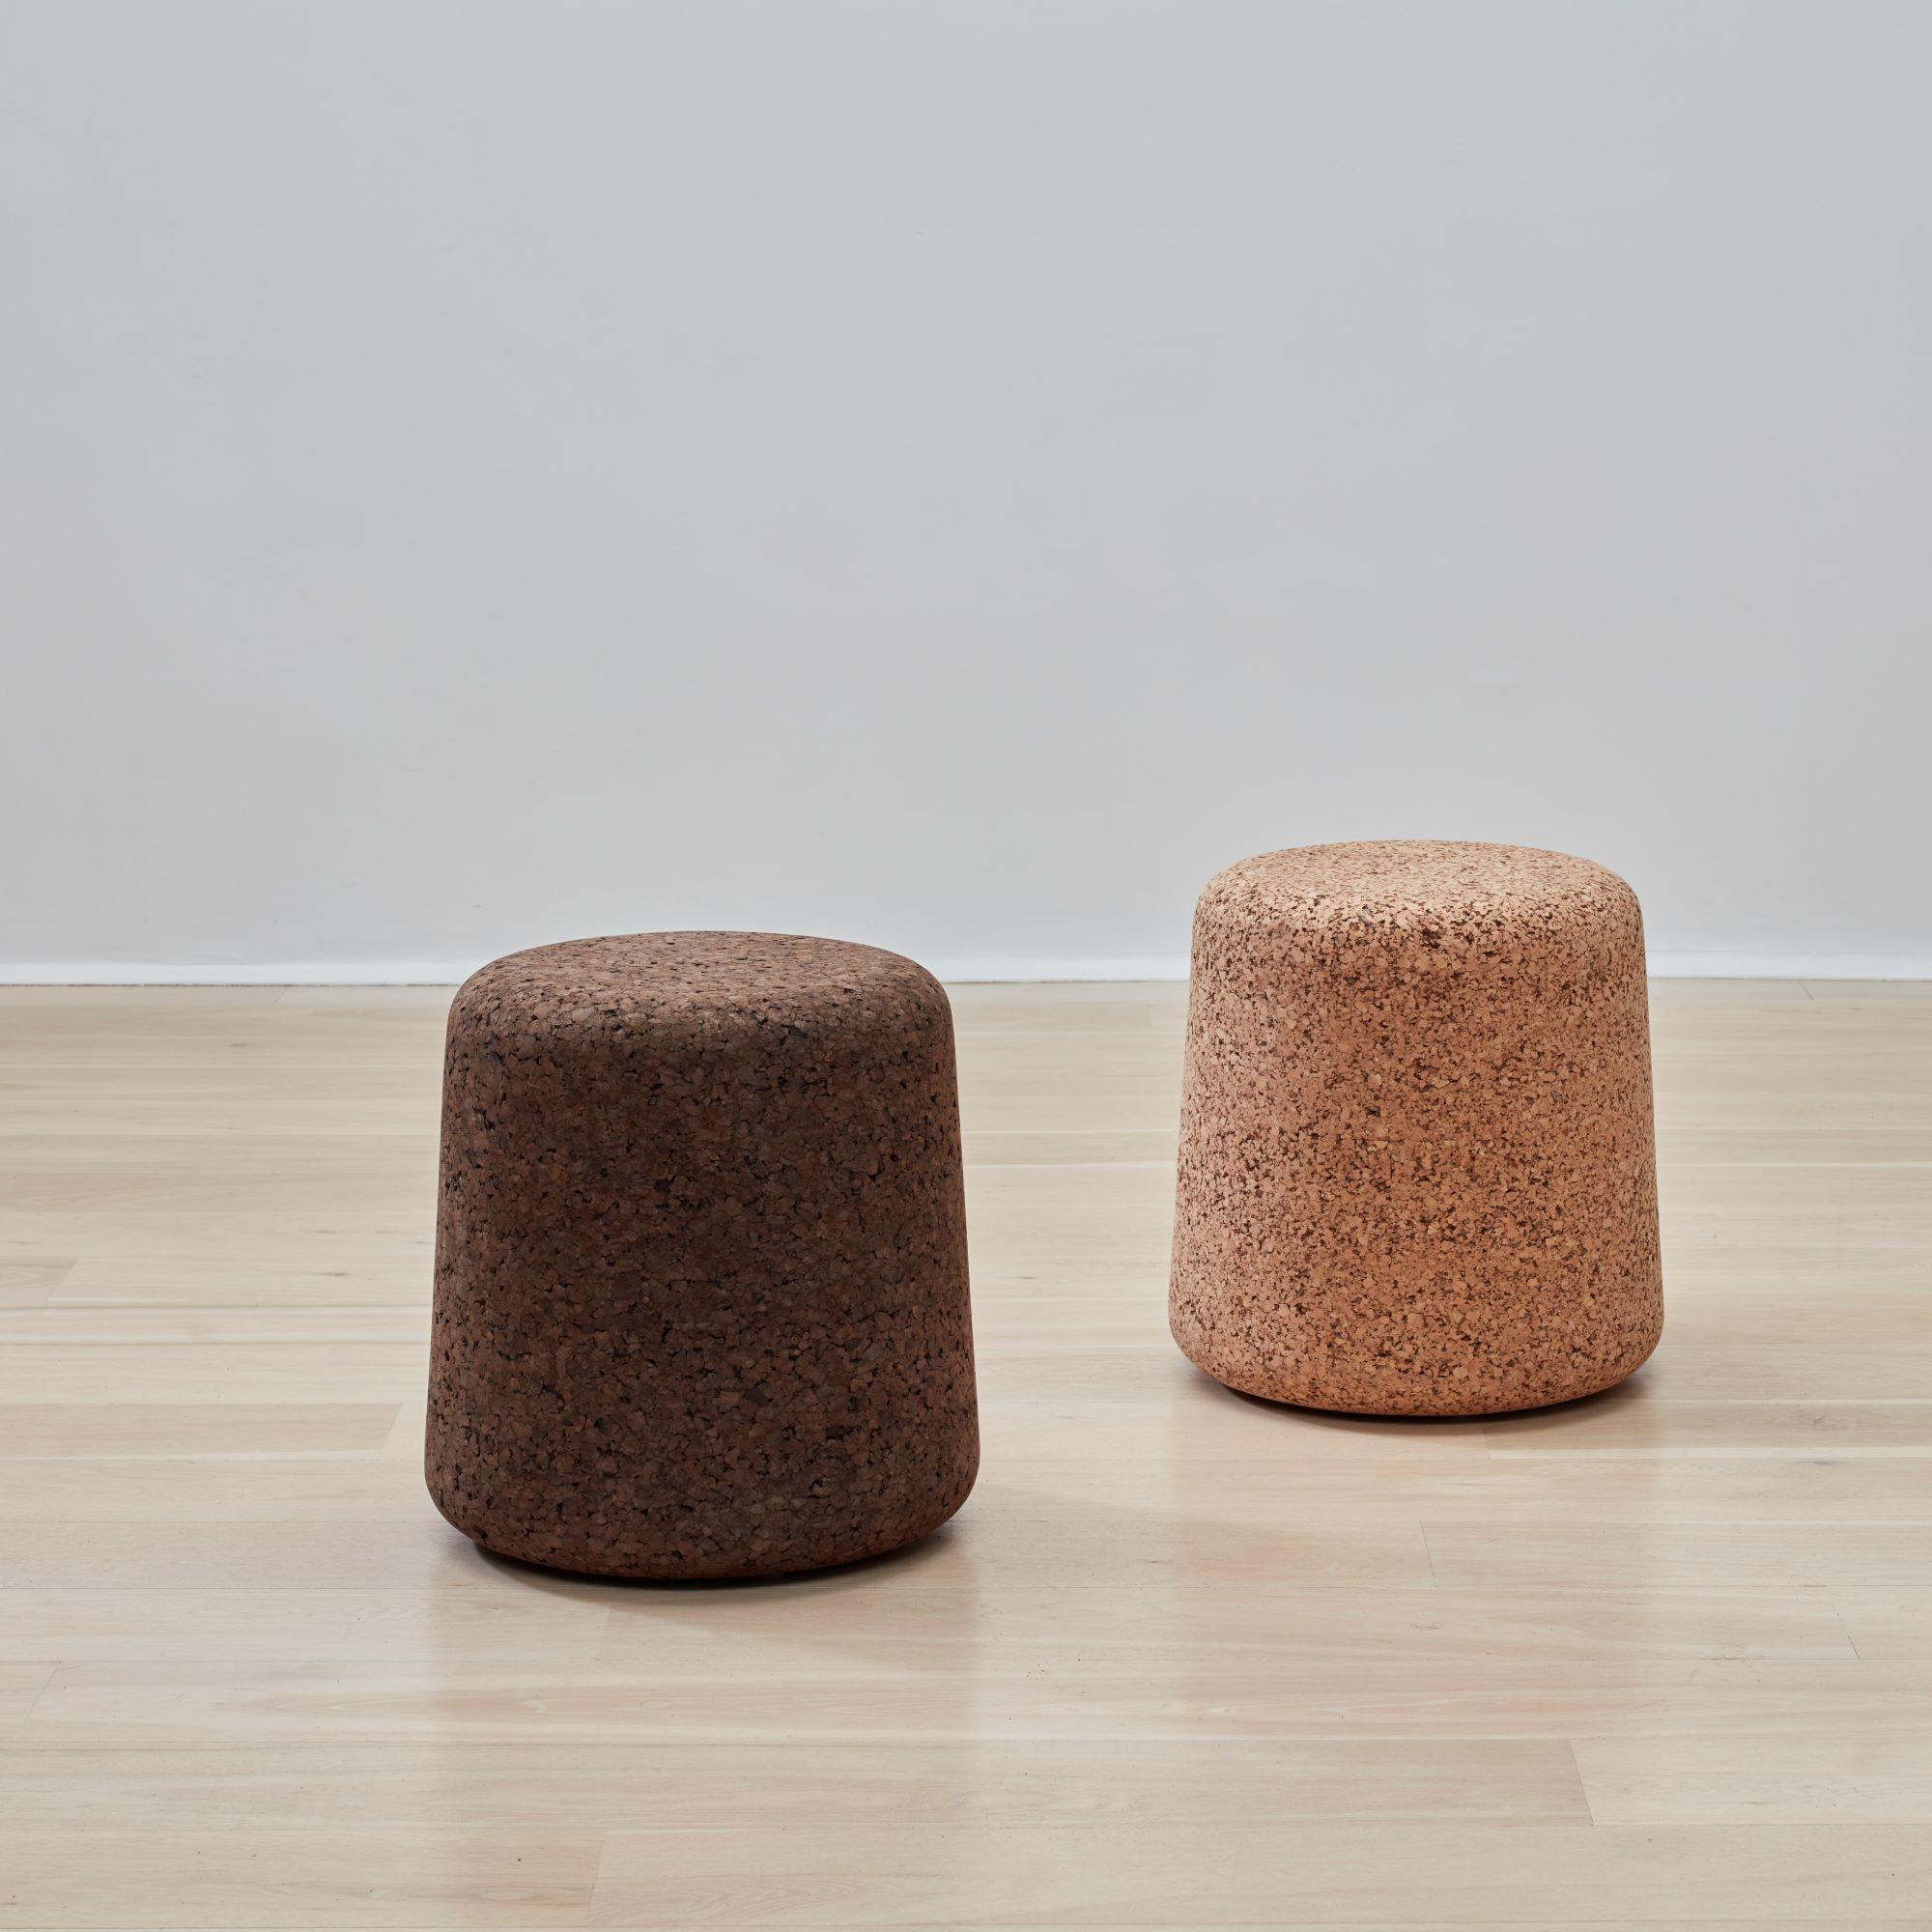 African Cork Stools kanju Interiors cork recycled harvested light cork dark cork natural organic colorful options customizable custom colors side table accent round stool seat durable modern minimal unique luxury indoor outdoor